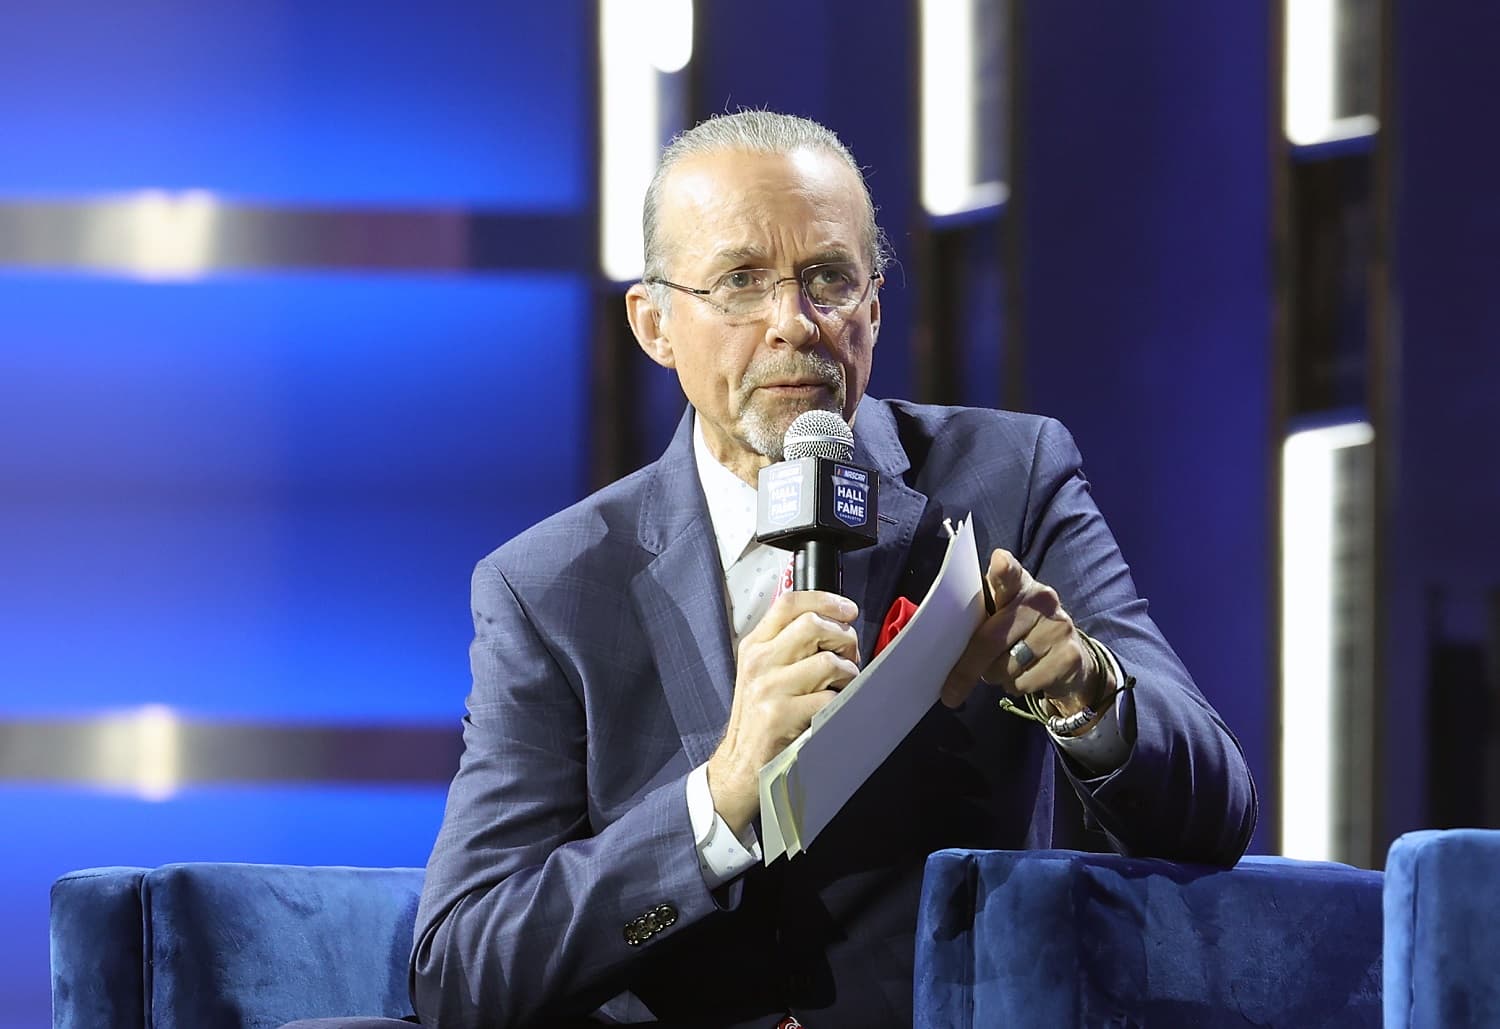 Kyle Petty speaks during the "Fireside Chat" prior to the NASCAR Hall of Fame Induction Ceremony at Charlotte Convention Center on Jan. 20, 2023 in Charlotte, North Carolina.